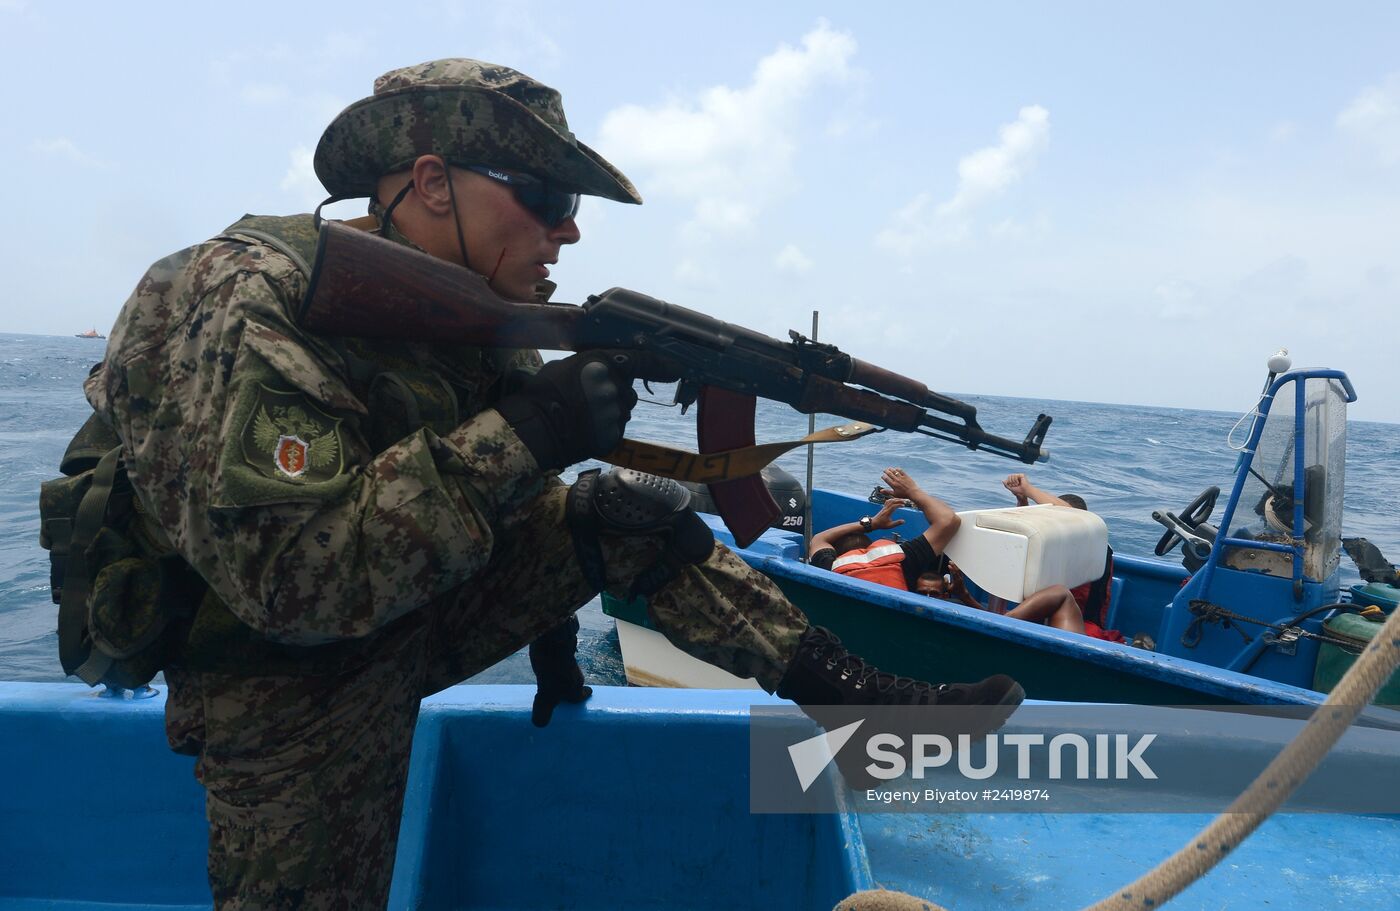 Storm-2014 drug police exercises of Russia and Latin American countries in Caribbean